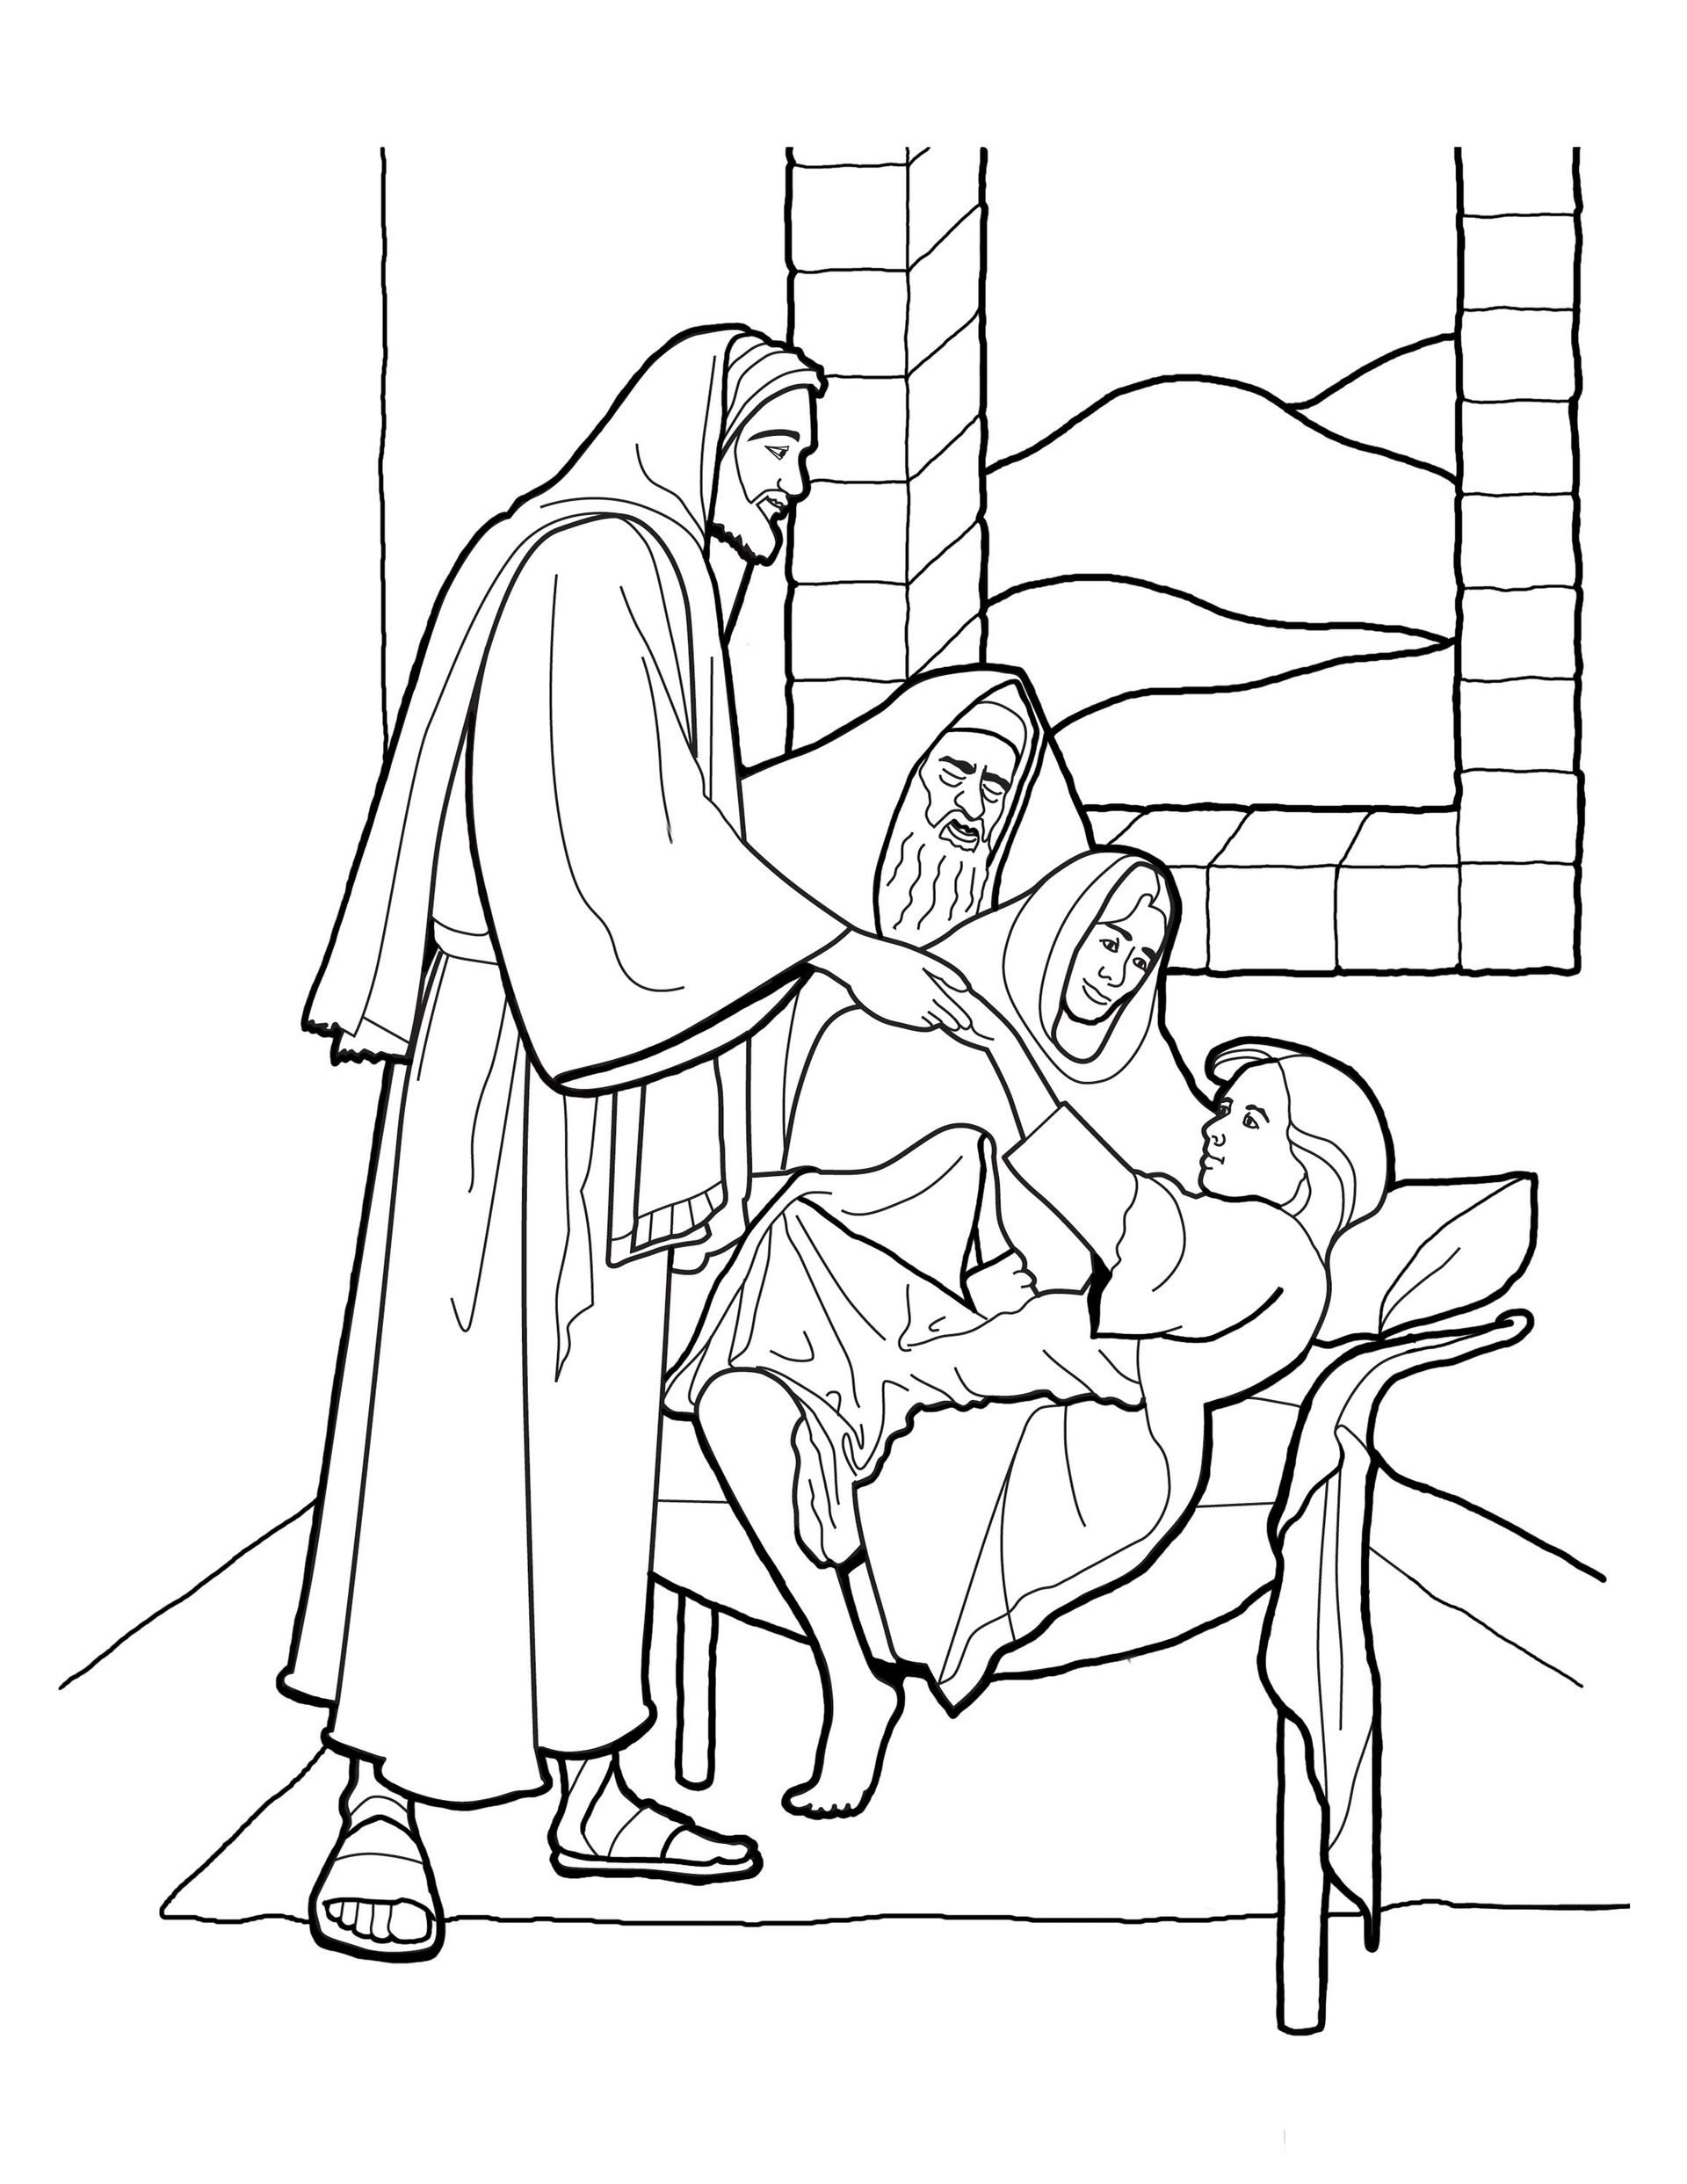 A sketch of Christ raising the daughter of Jairus, based on the painting by Greg Olsen.